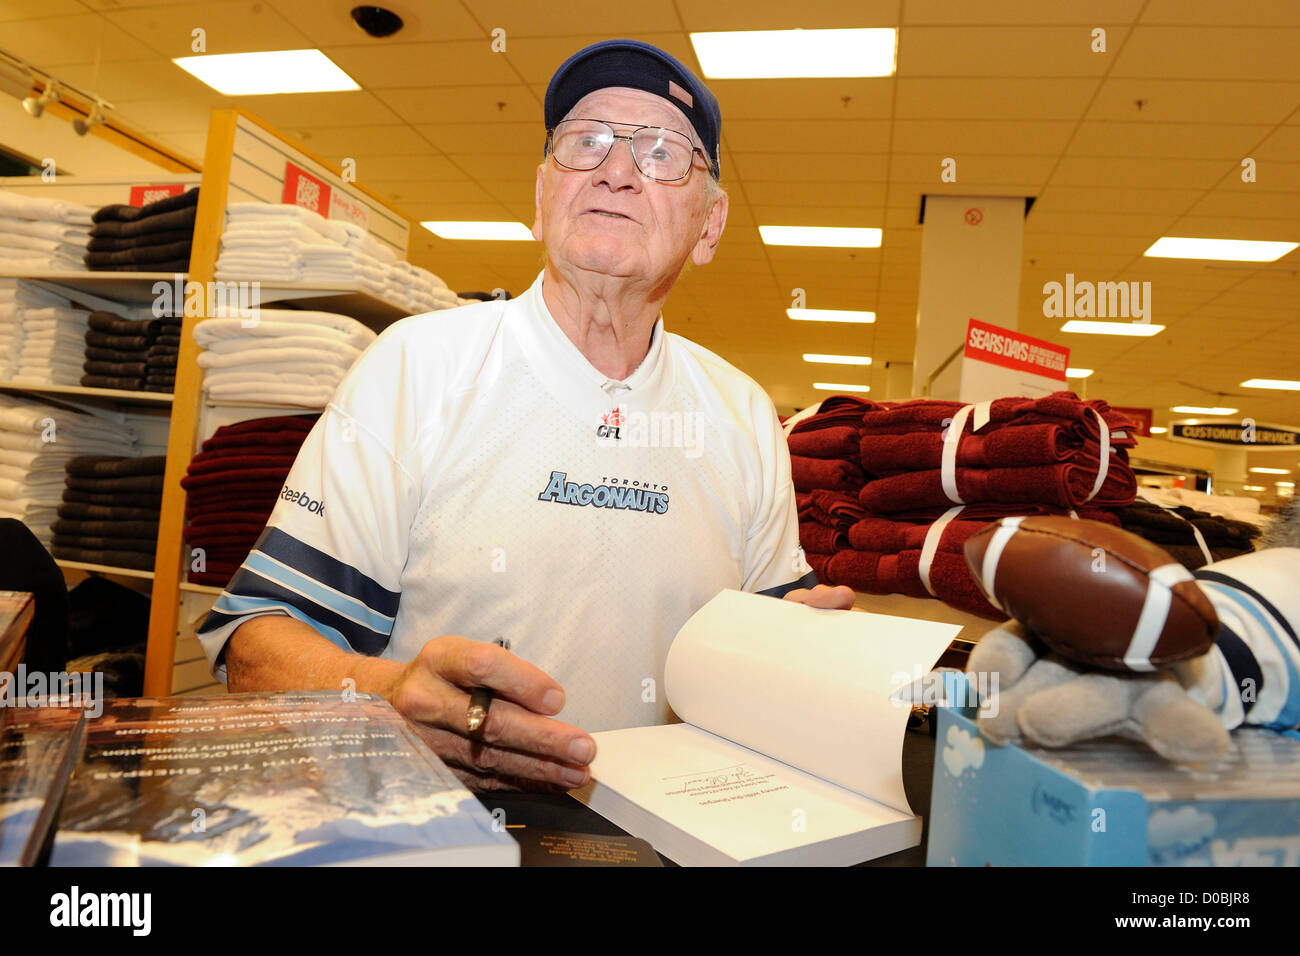 November 21, 2012. Toronto, Canada. CFL Argonauts Legend Zeke O'Connor  signs copies of his new book: Journey with the Sherpas at the Sears department store in Fairview Mall. (DCP/N8N) Stock Photo